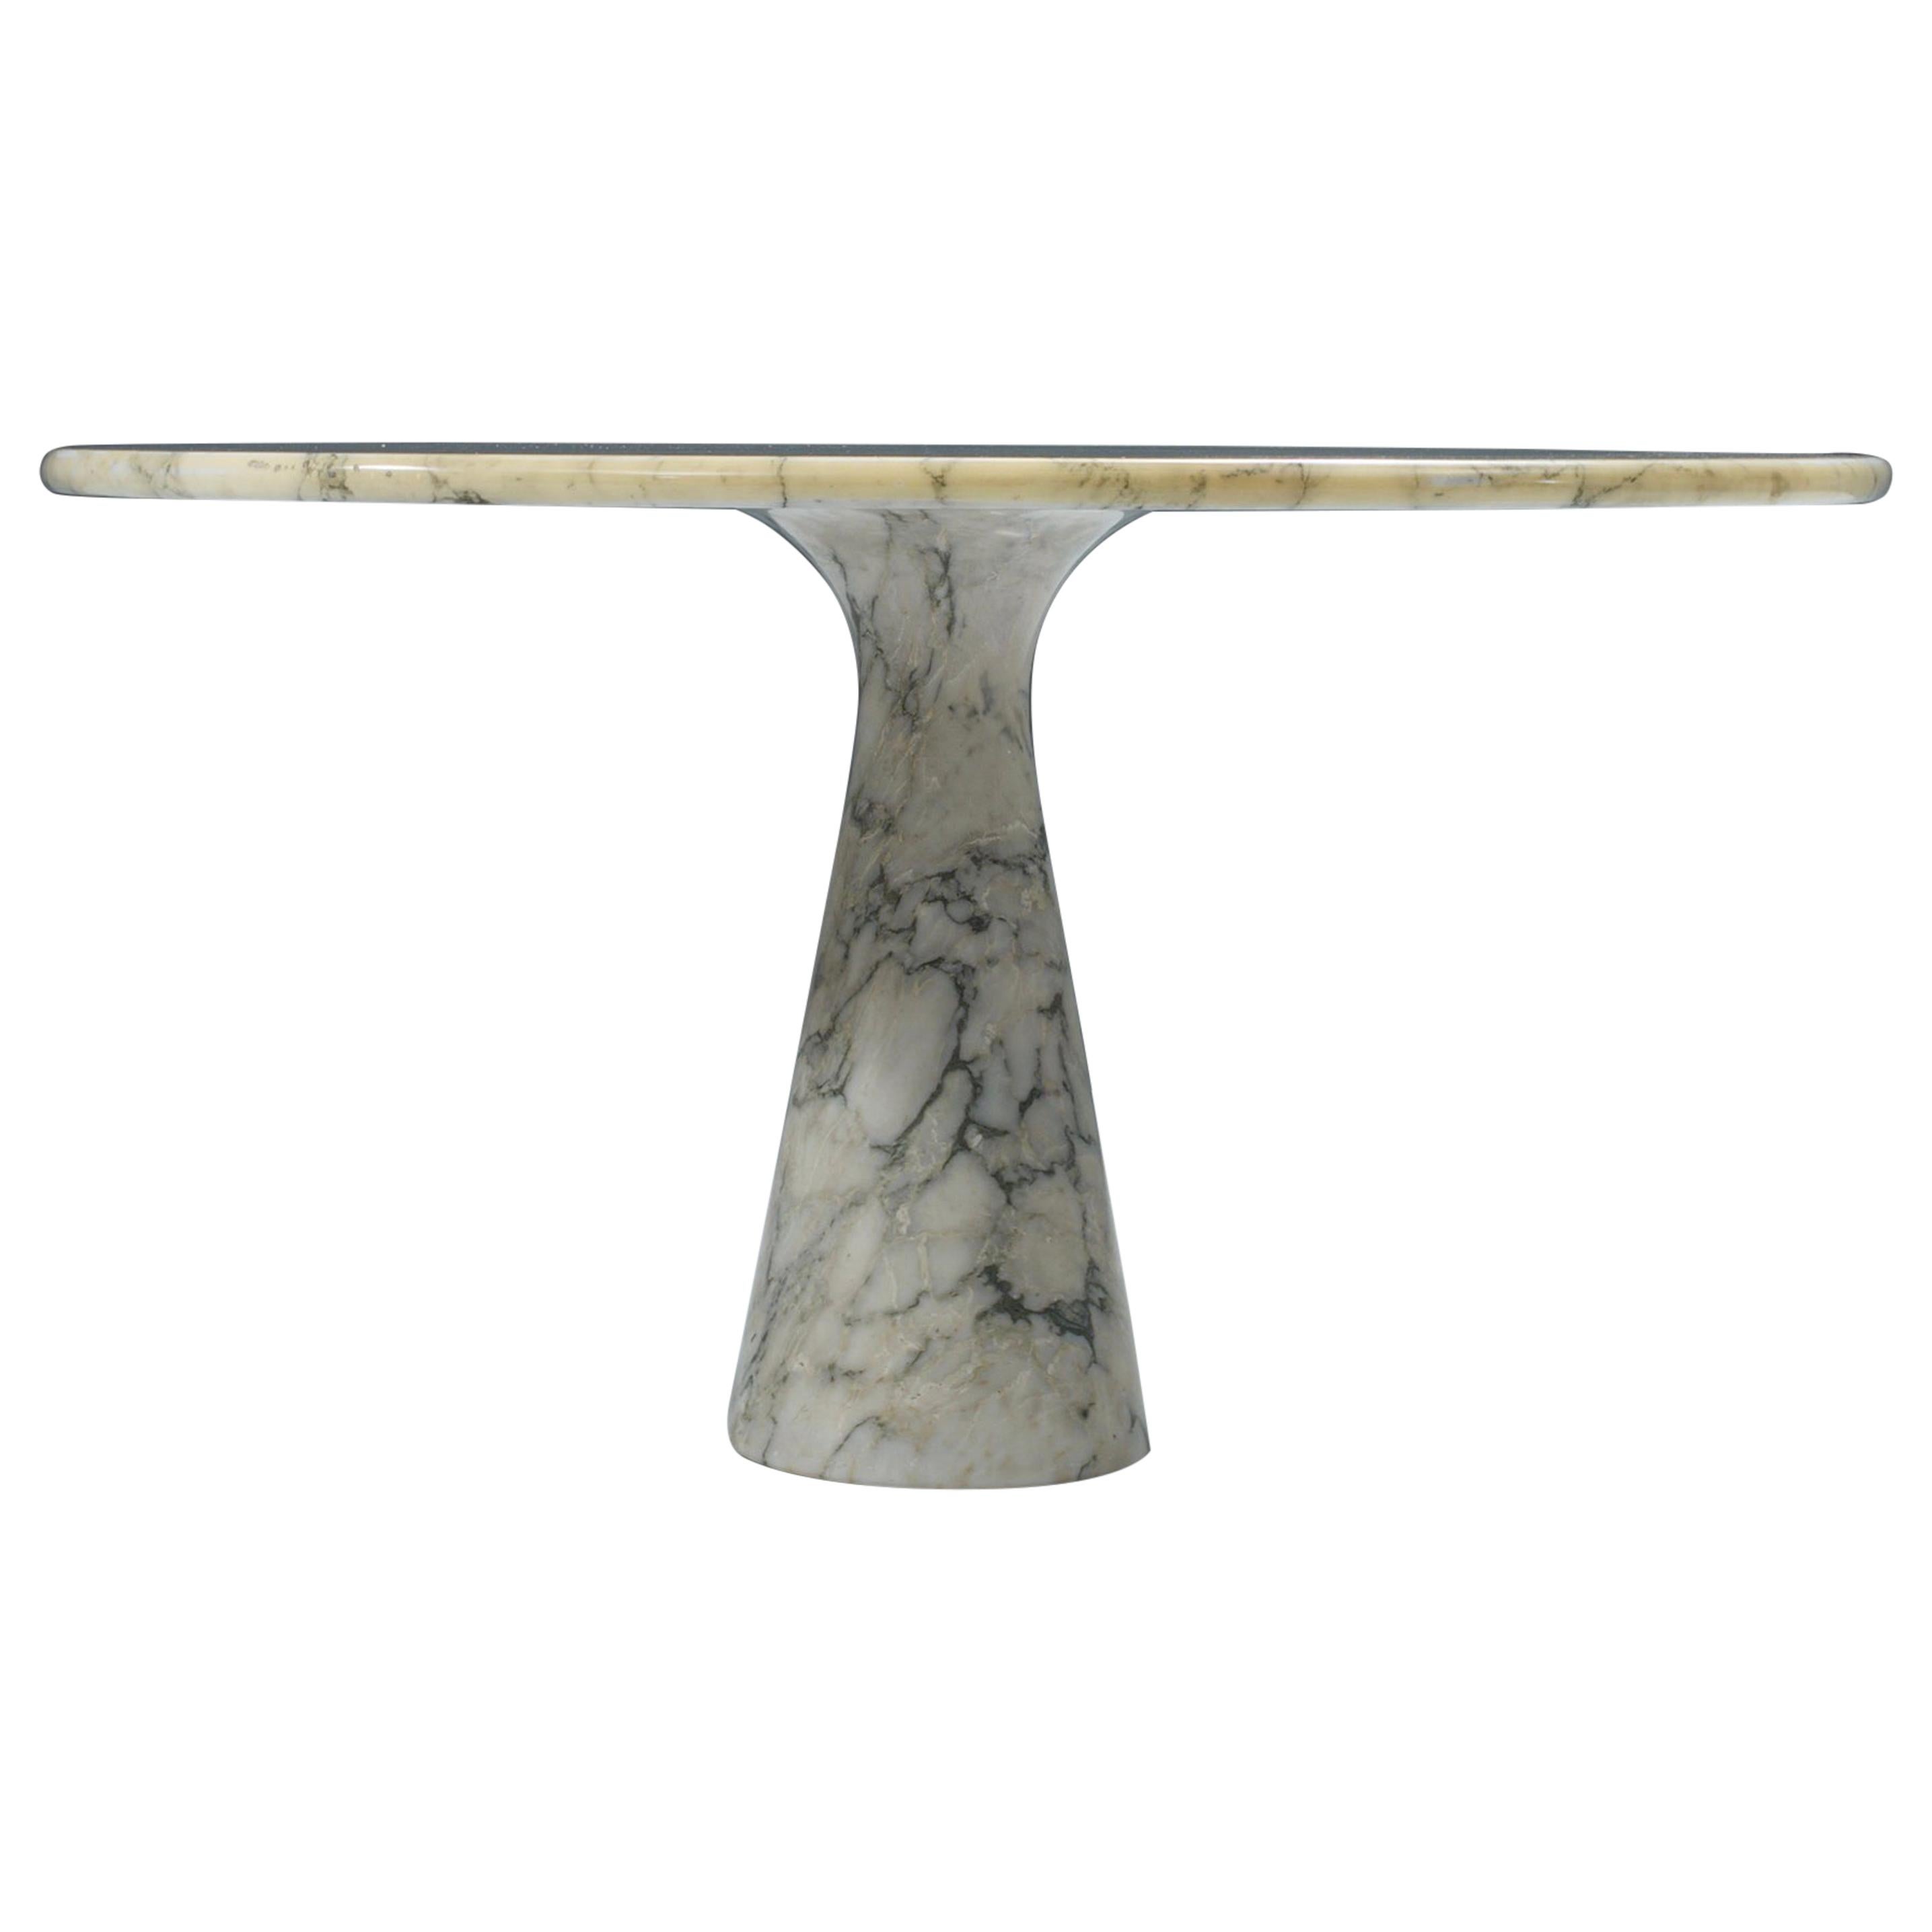 Angelo Mangiarotti 'M1' Dining Table for Skipper in Carrara Marble, Italy, 1958